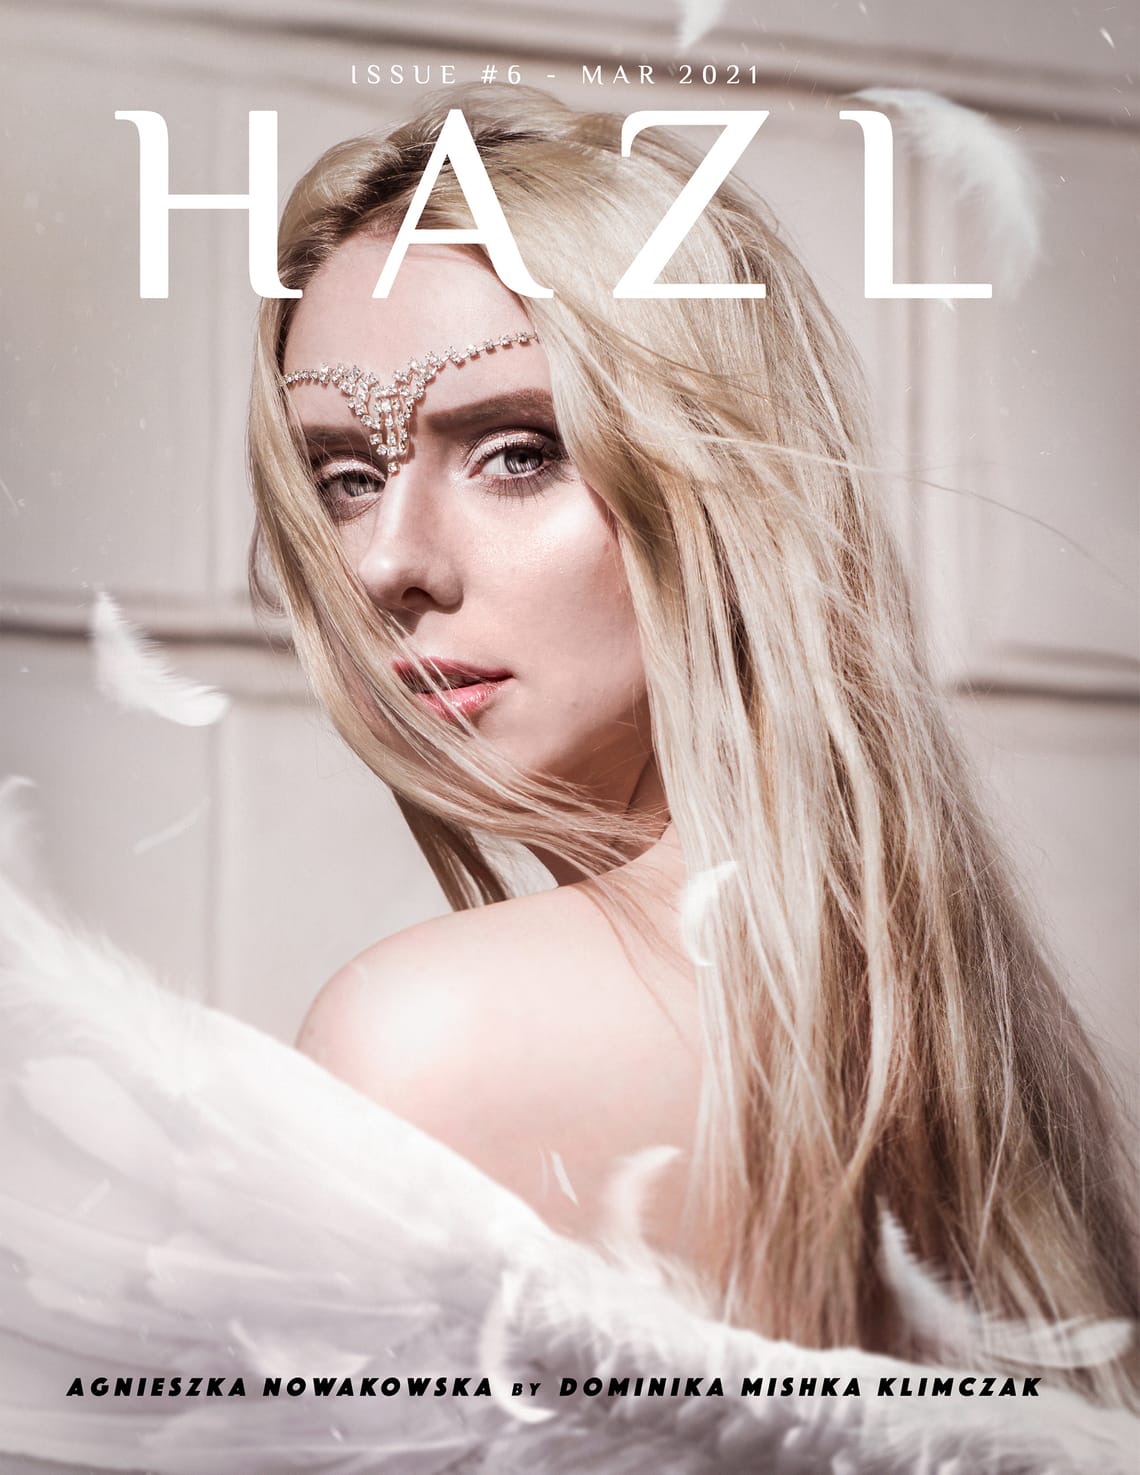 HAZL Magazine Issue #6 -  March 2021 Launched Worldwide